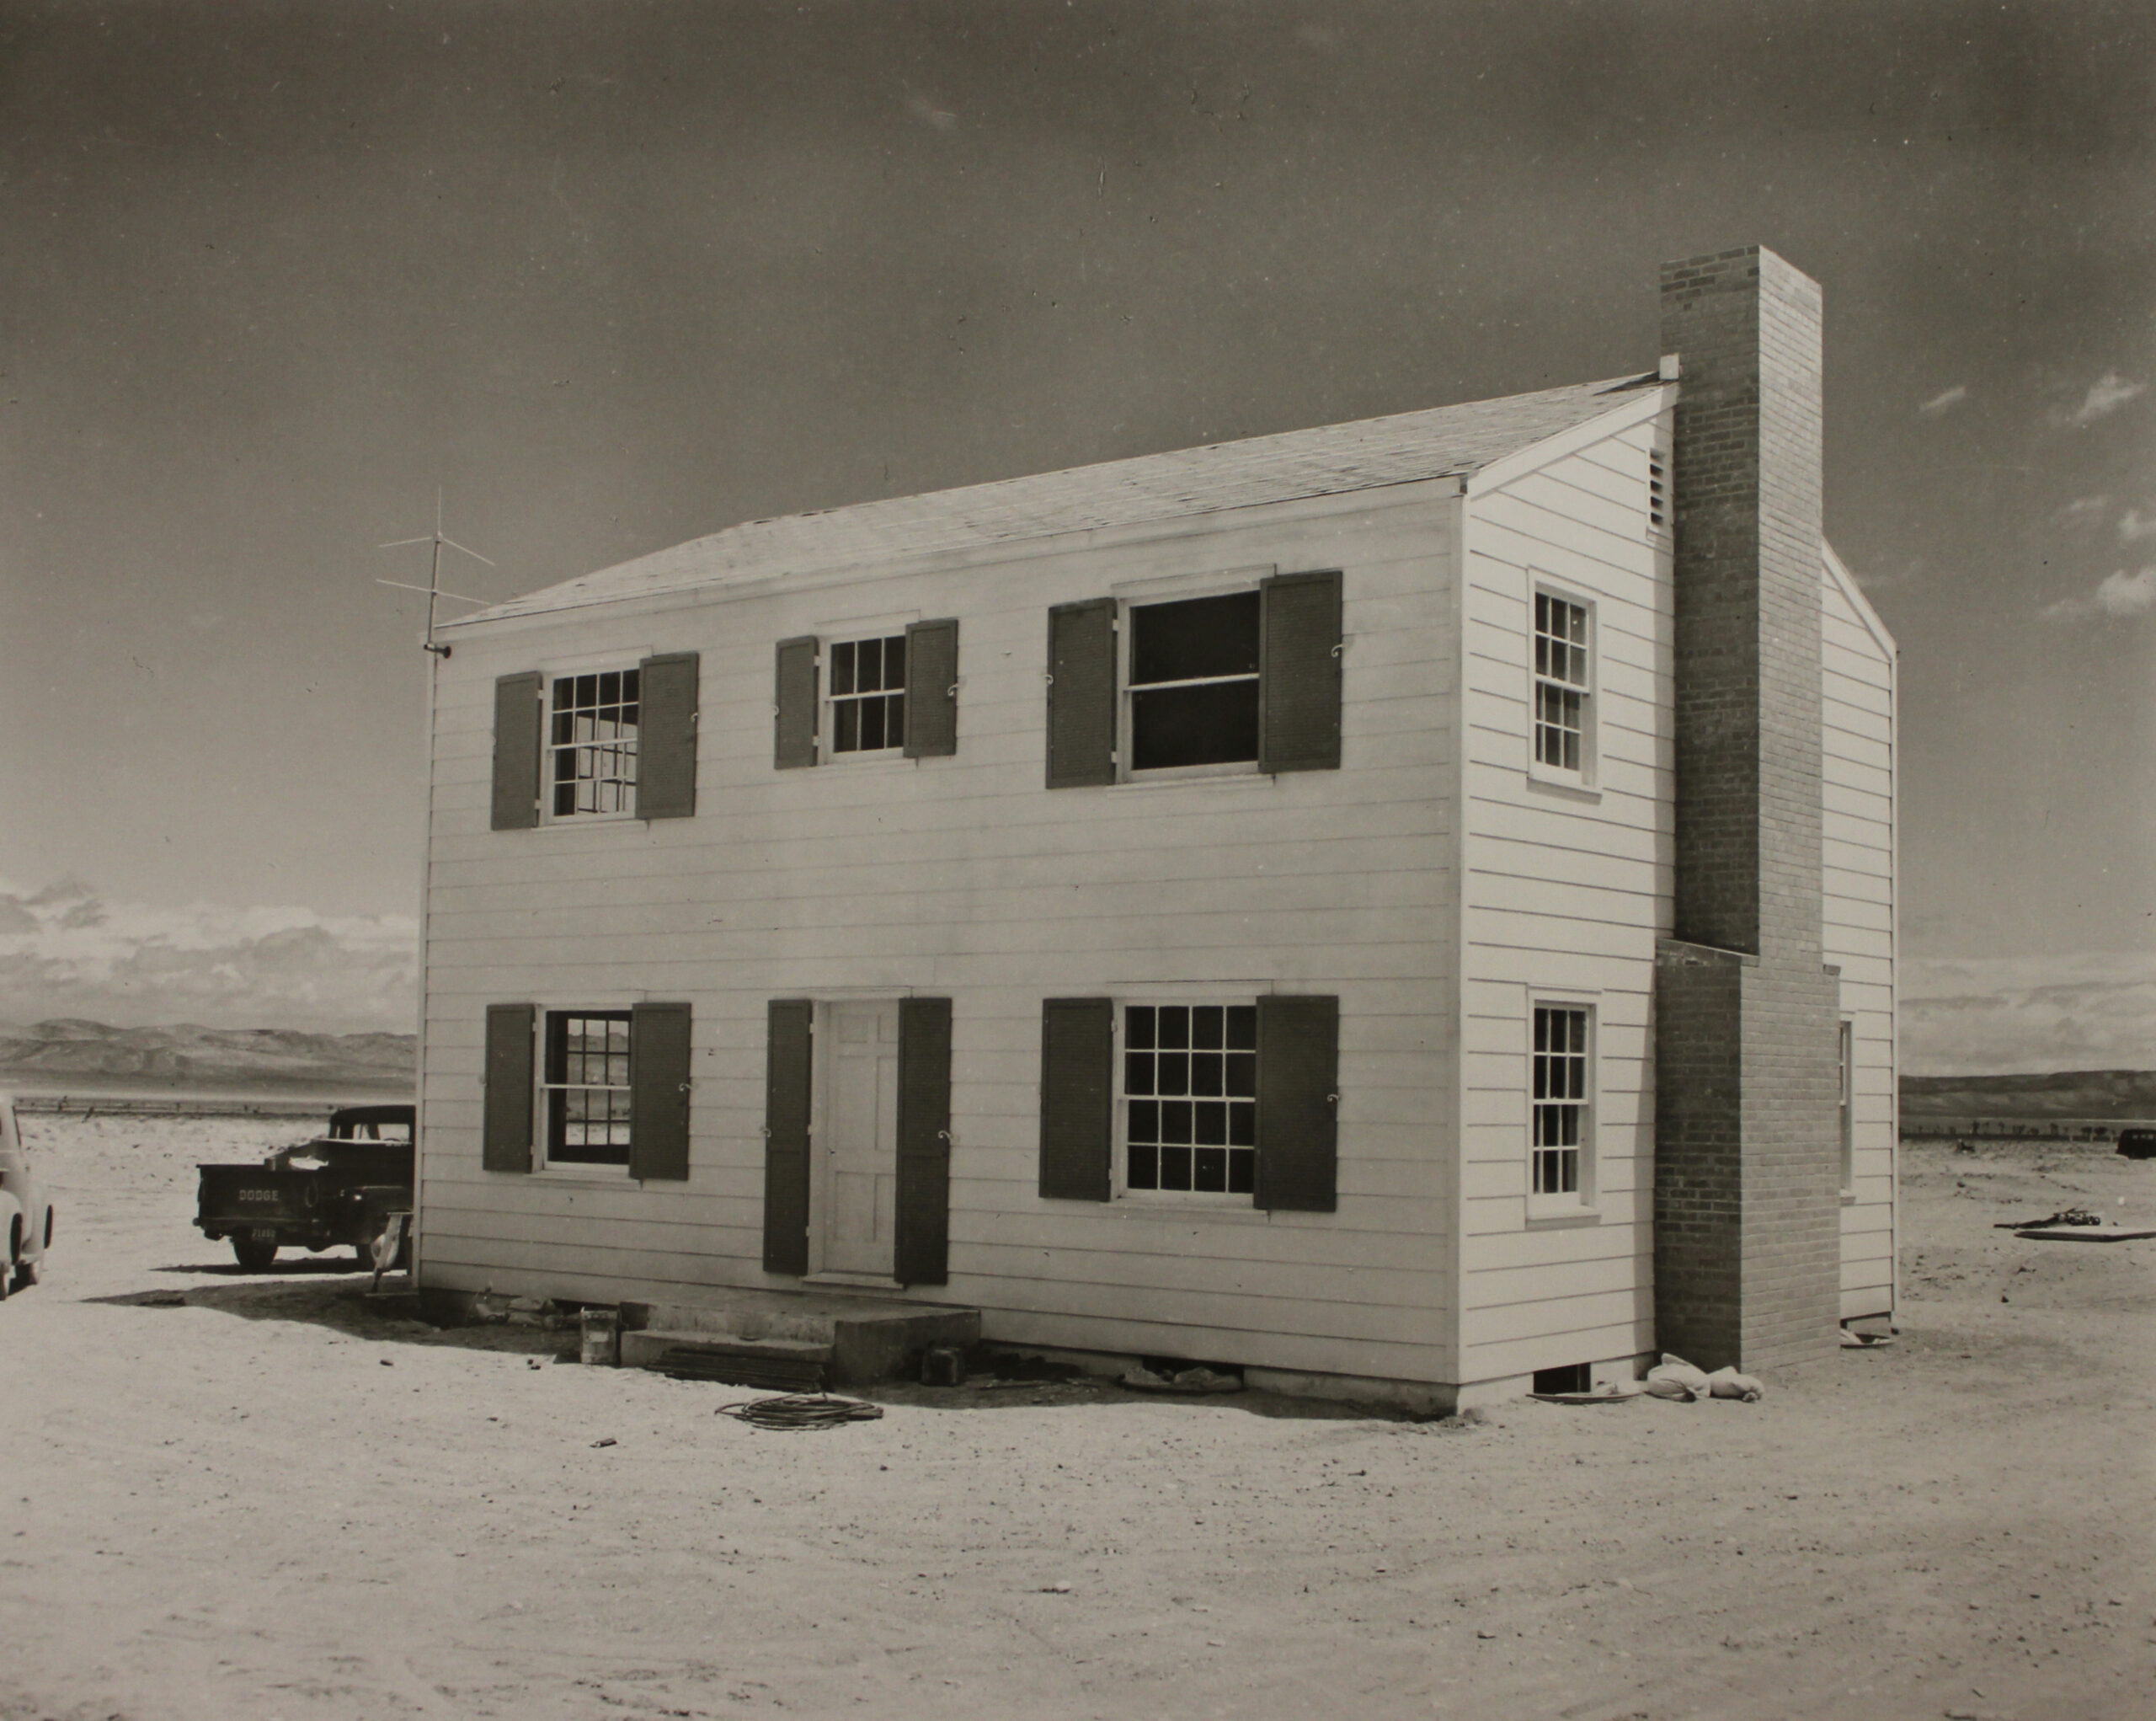 Apple-2 house before test – National Archives Identifier: 7065482